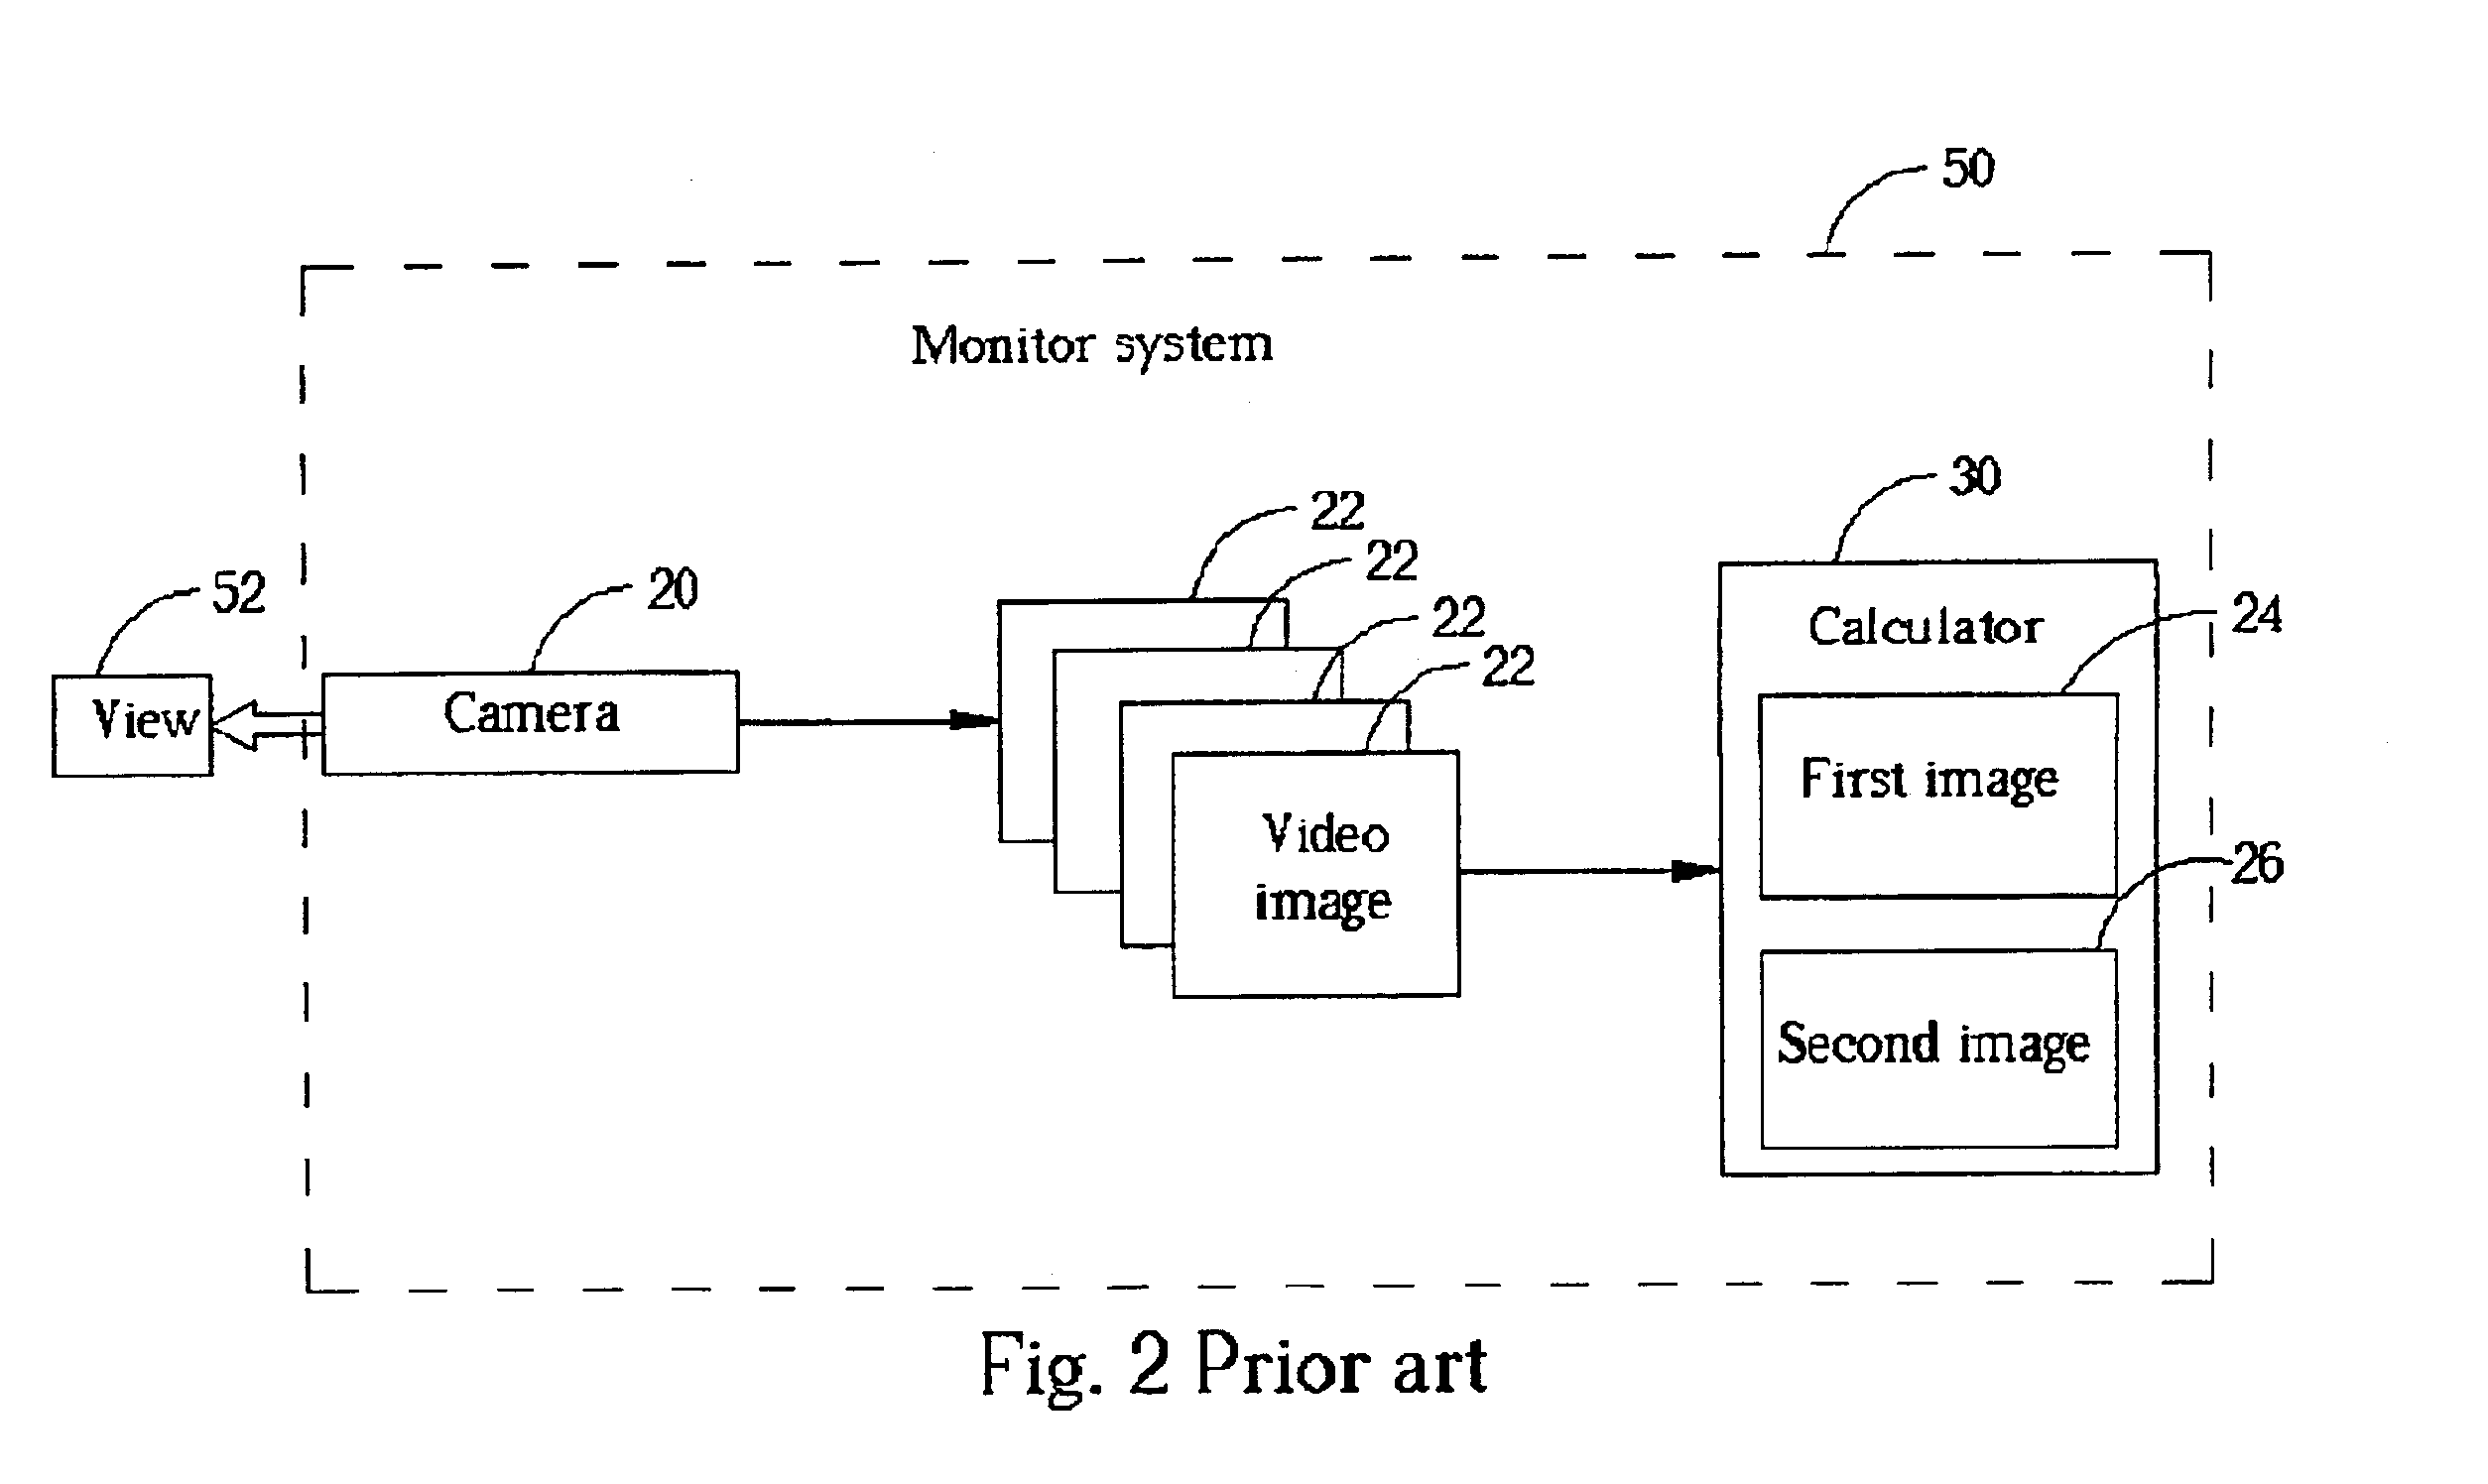 Method for detecting moving objects by comparing video images